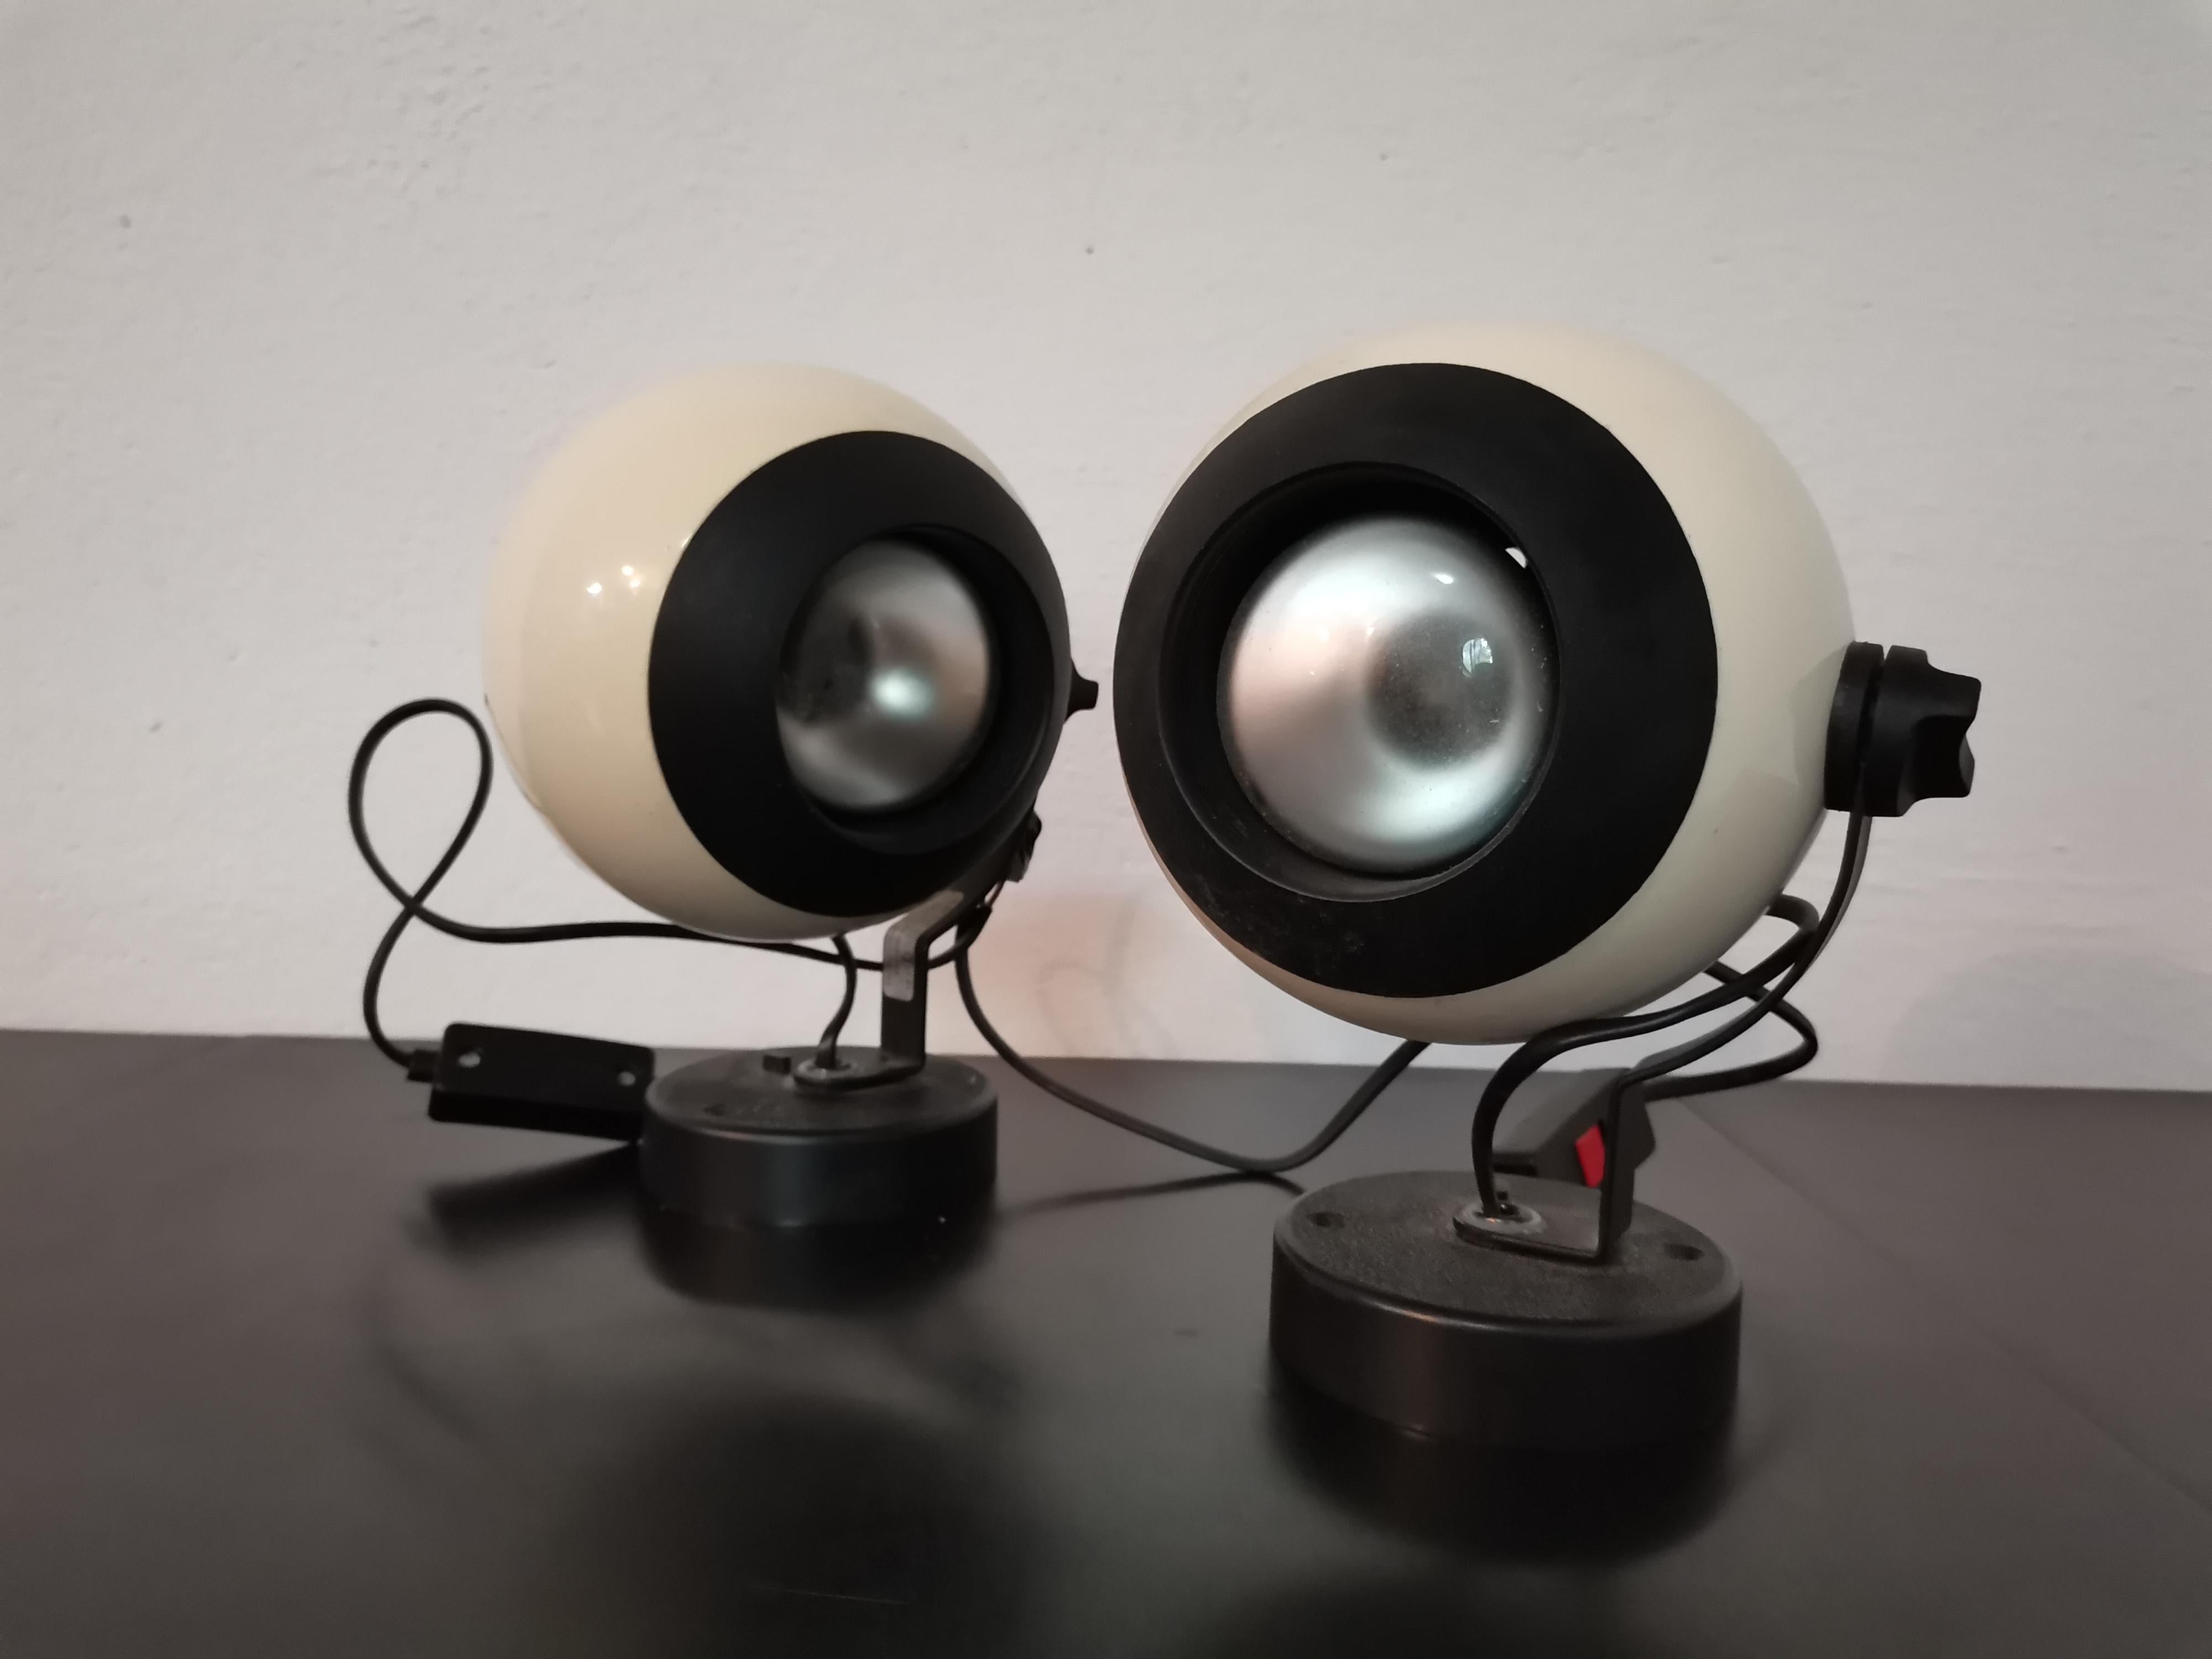 Wall Lamp

Period: 1970s

Style: modern, classic

Colour: white, black

Materials: aluminium, plastic

Condition: original vintage condition, some traces of use, fully functional